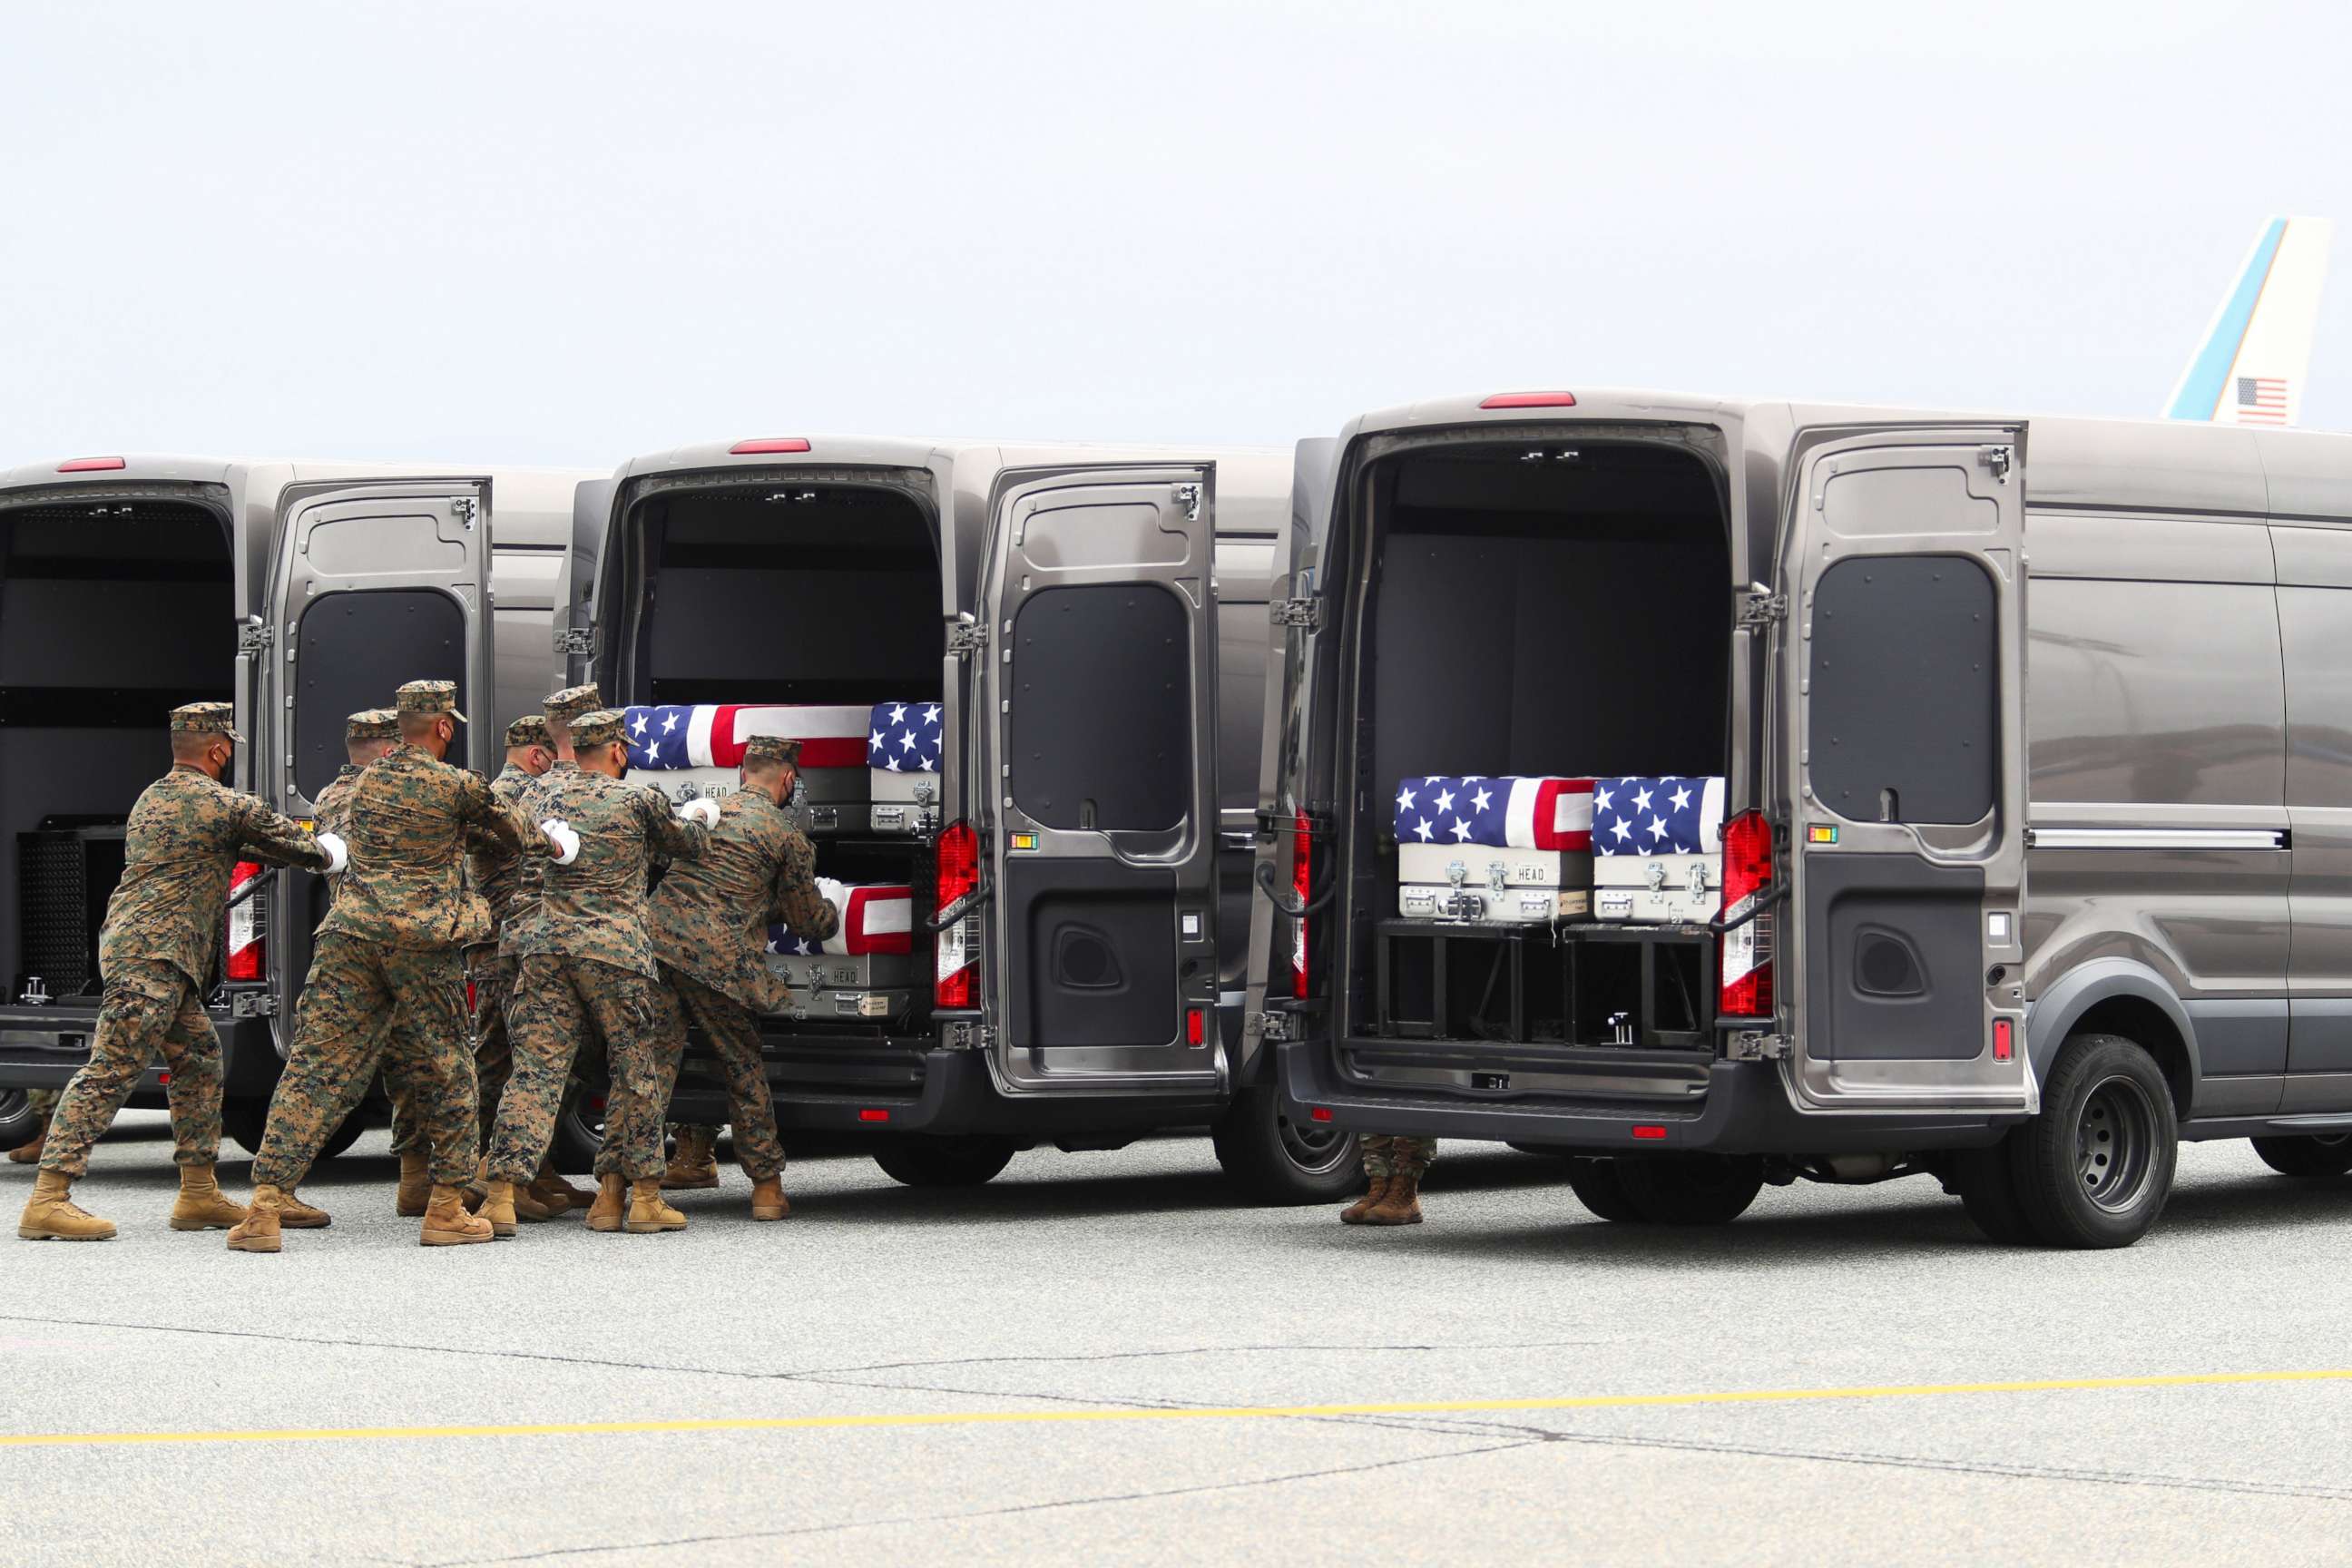 PHOTO: Members of the armed forces place one of the transfer cases containing the remains of U.S. Military service members who were killed by a suicide bombing at the Hamid Karzai International Airport, at Dover Air Force Base in Dover, Aug. 29, 2021.